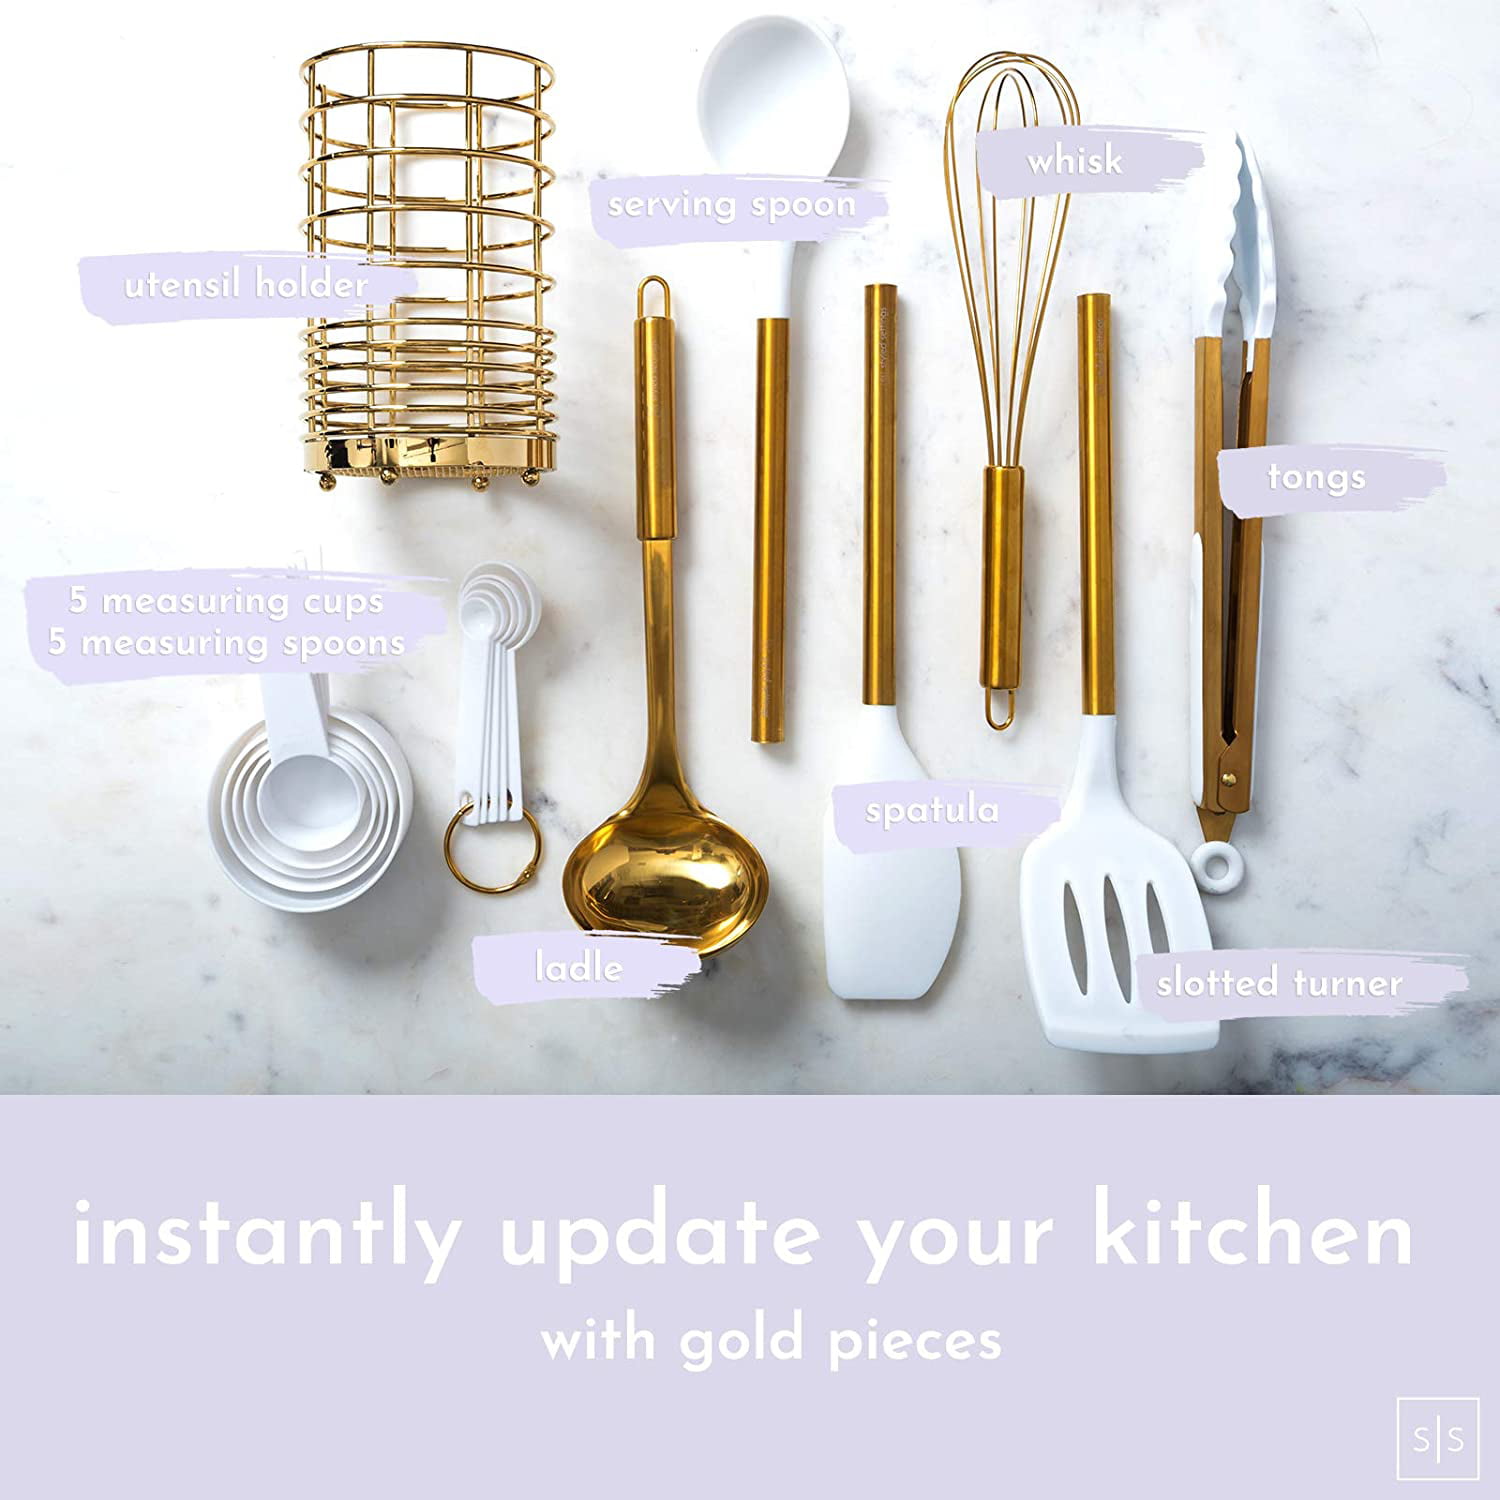 White Silicone and Gold Cooking Utensils Set with Holder Gold Spatula White Kitchen Utensils and Gold Utensil Holder 7 PC Gold Kitchen Utensils Set Includes Gold Whisk Gold Kitchen Accessories